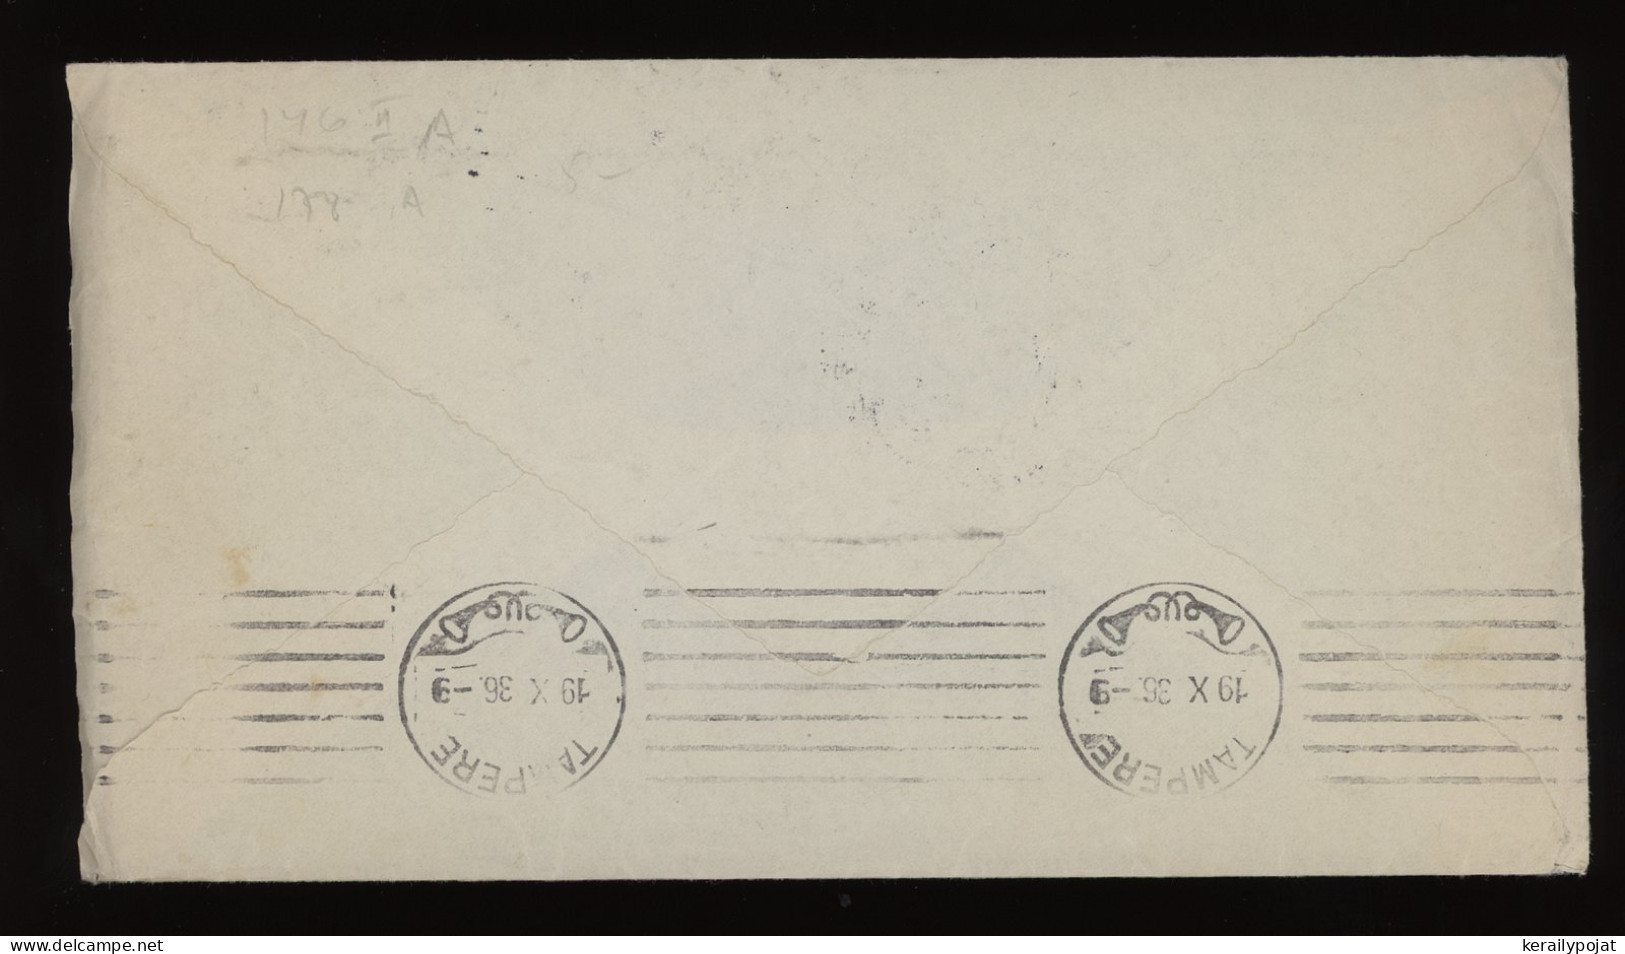 Sweden 1936 Stockholm Air Mail Cover To Finland__(12251) - Covers & Documents